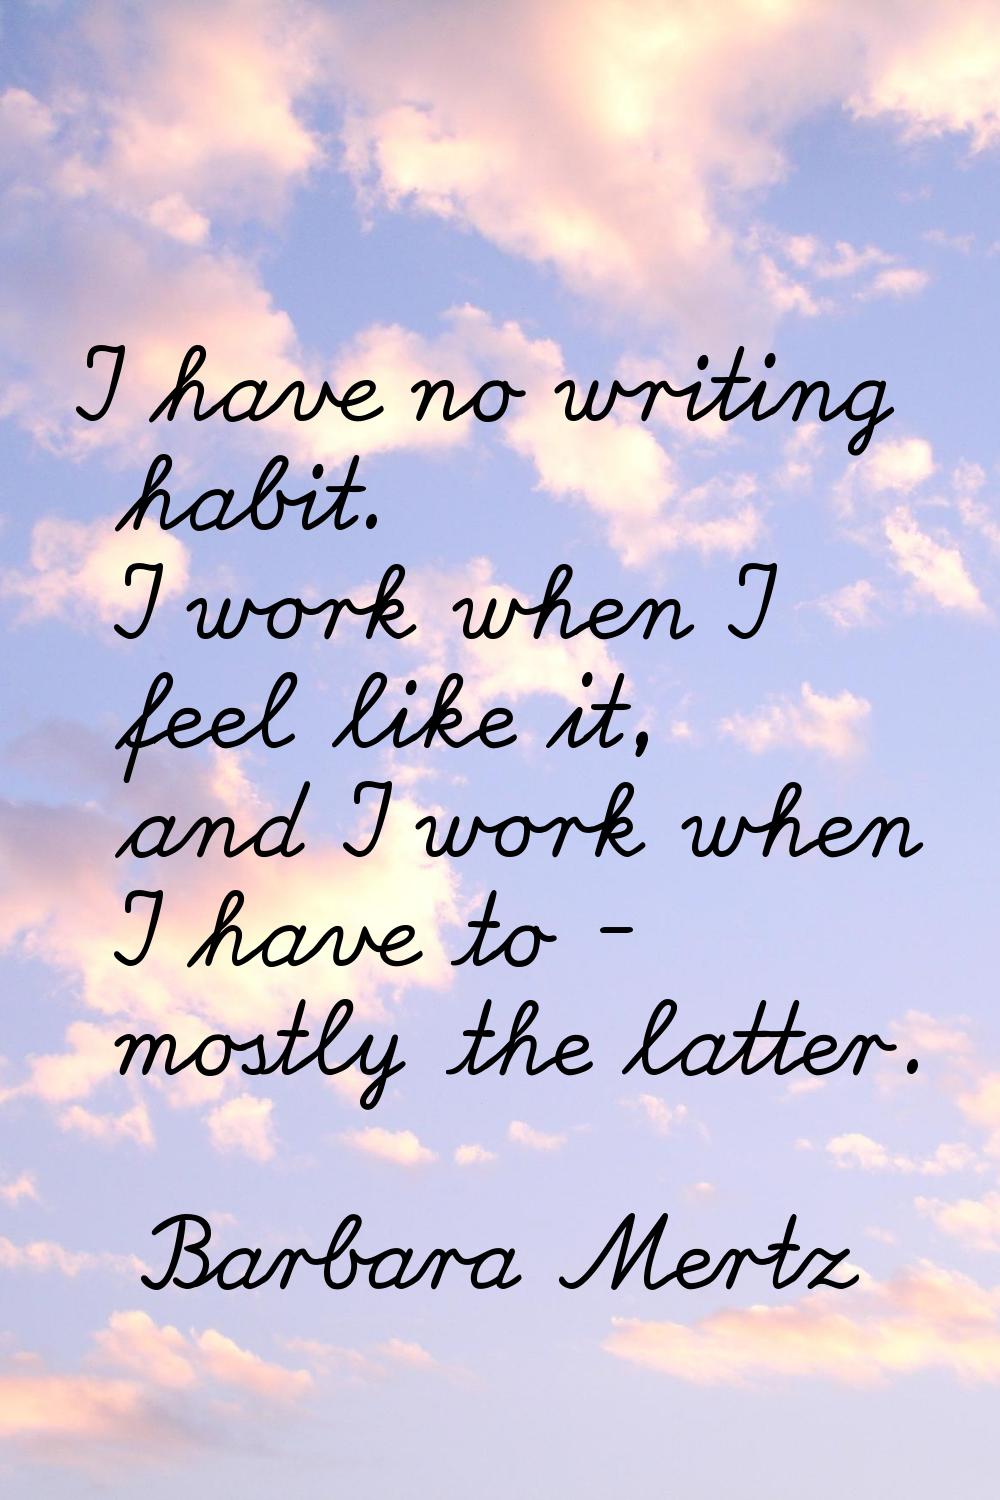 I have no writing habit. I work when I feel like it, and I work when I have to - mostly the latter.